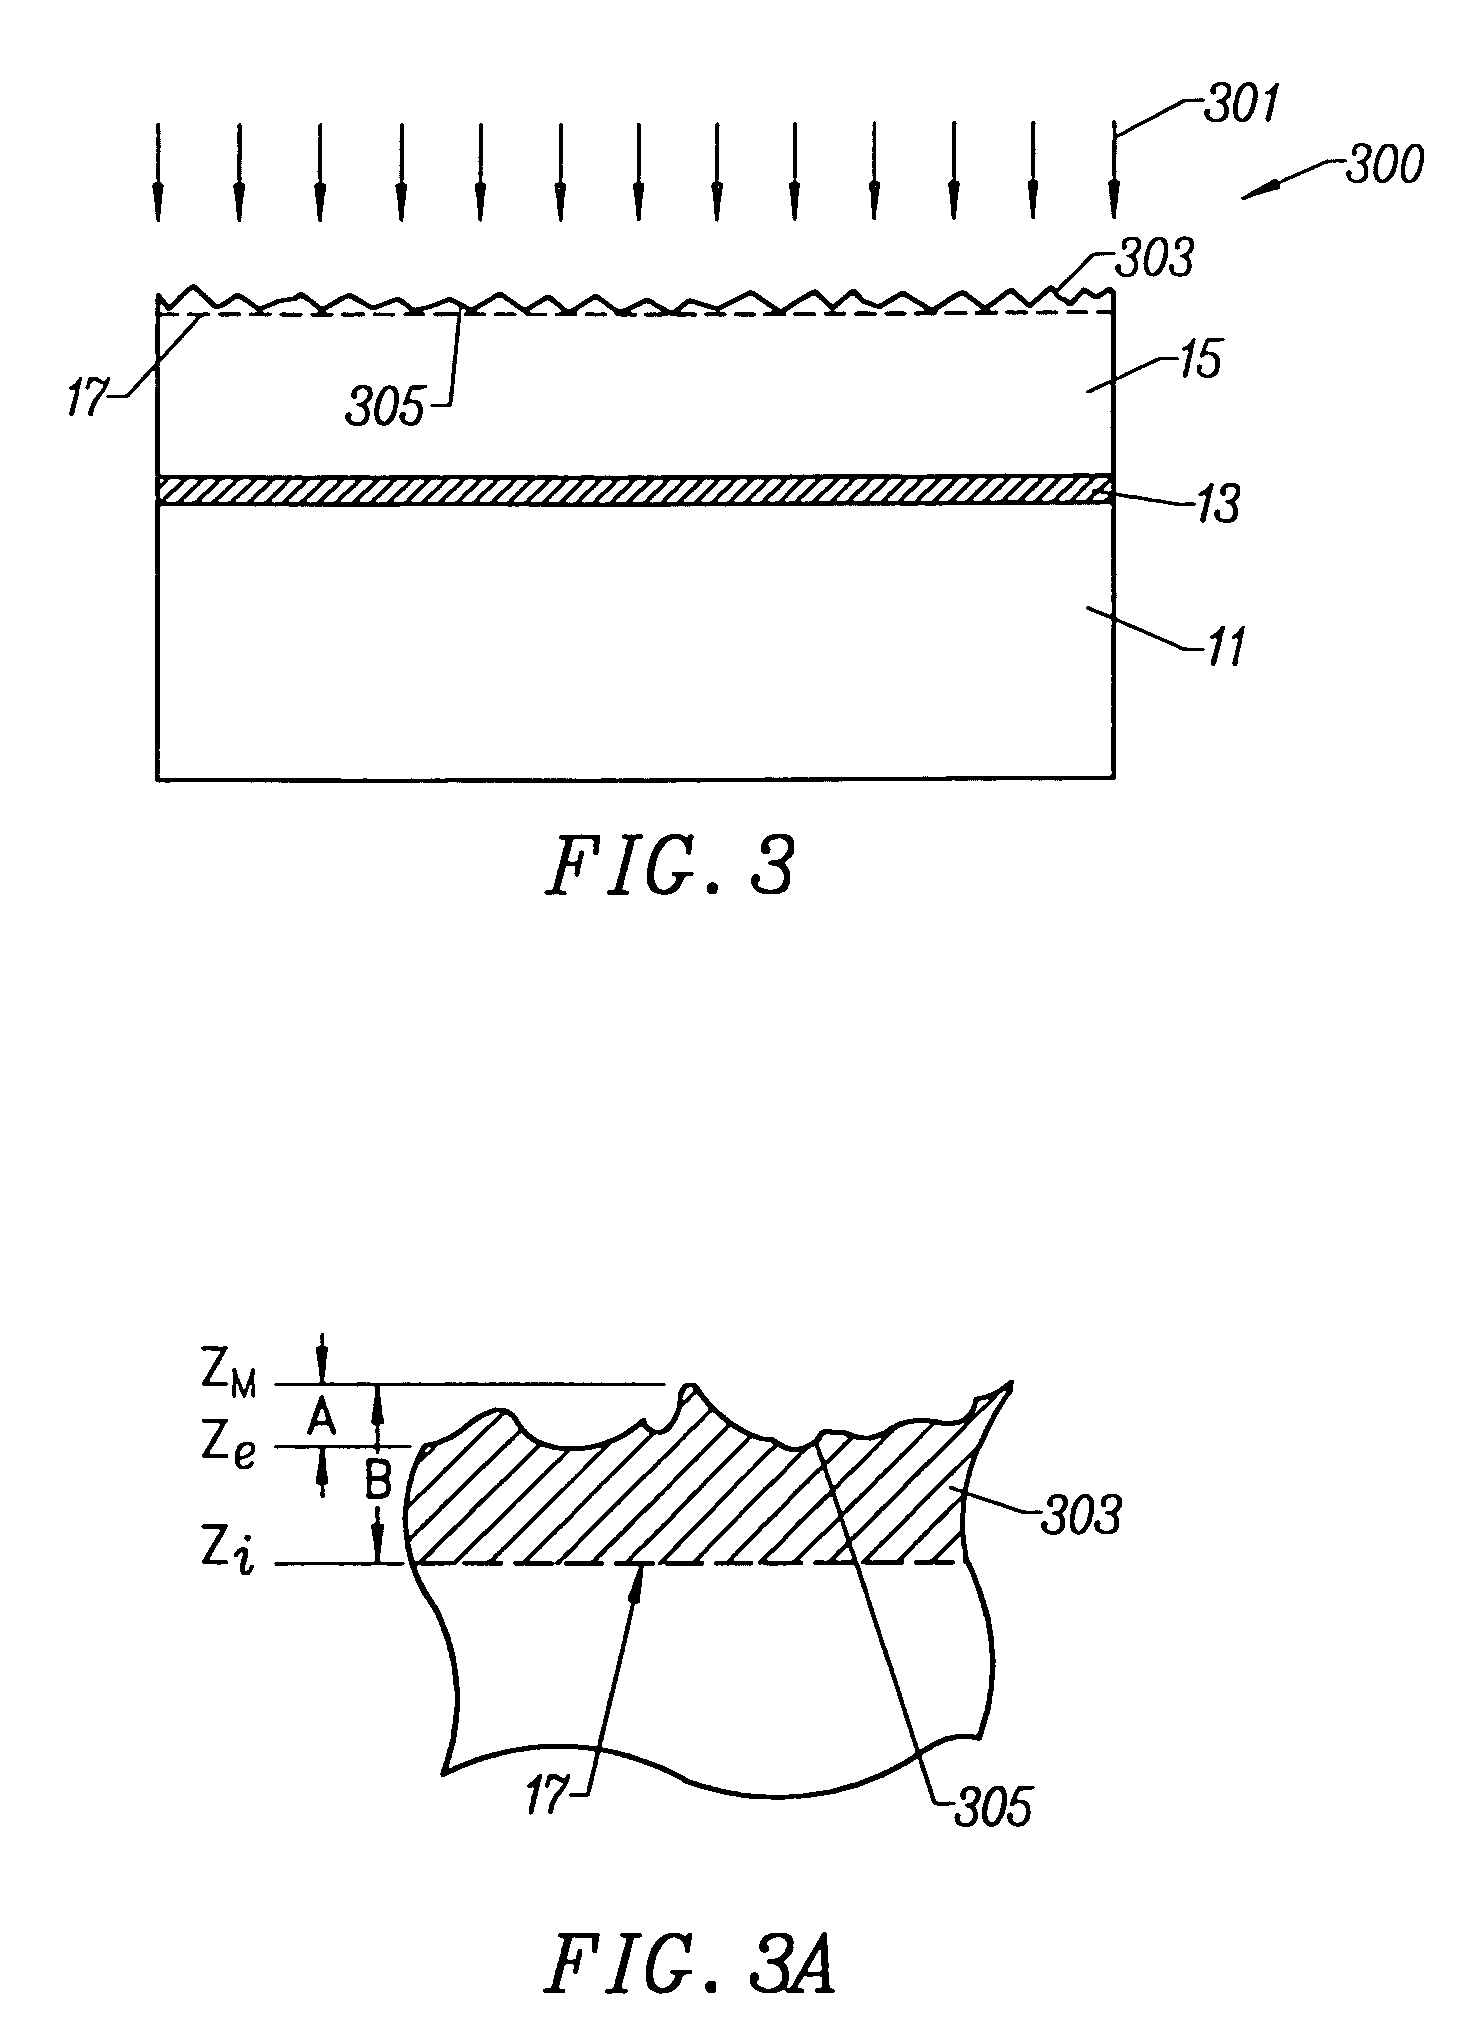 Treatment method of film quality for the manufacture of substrates